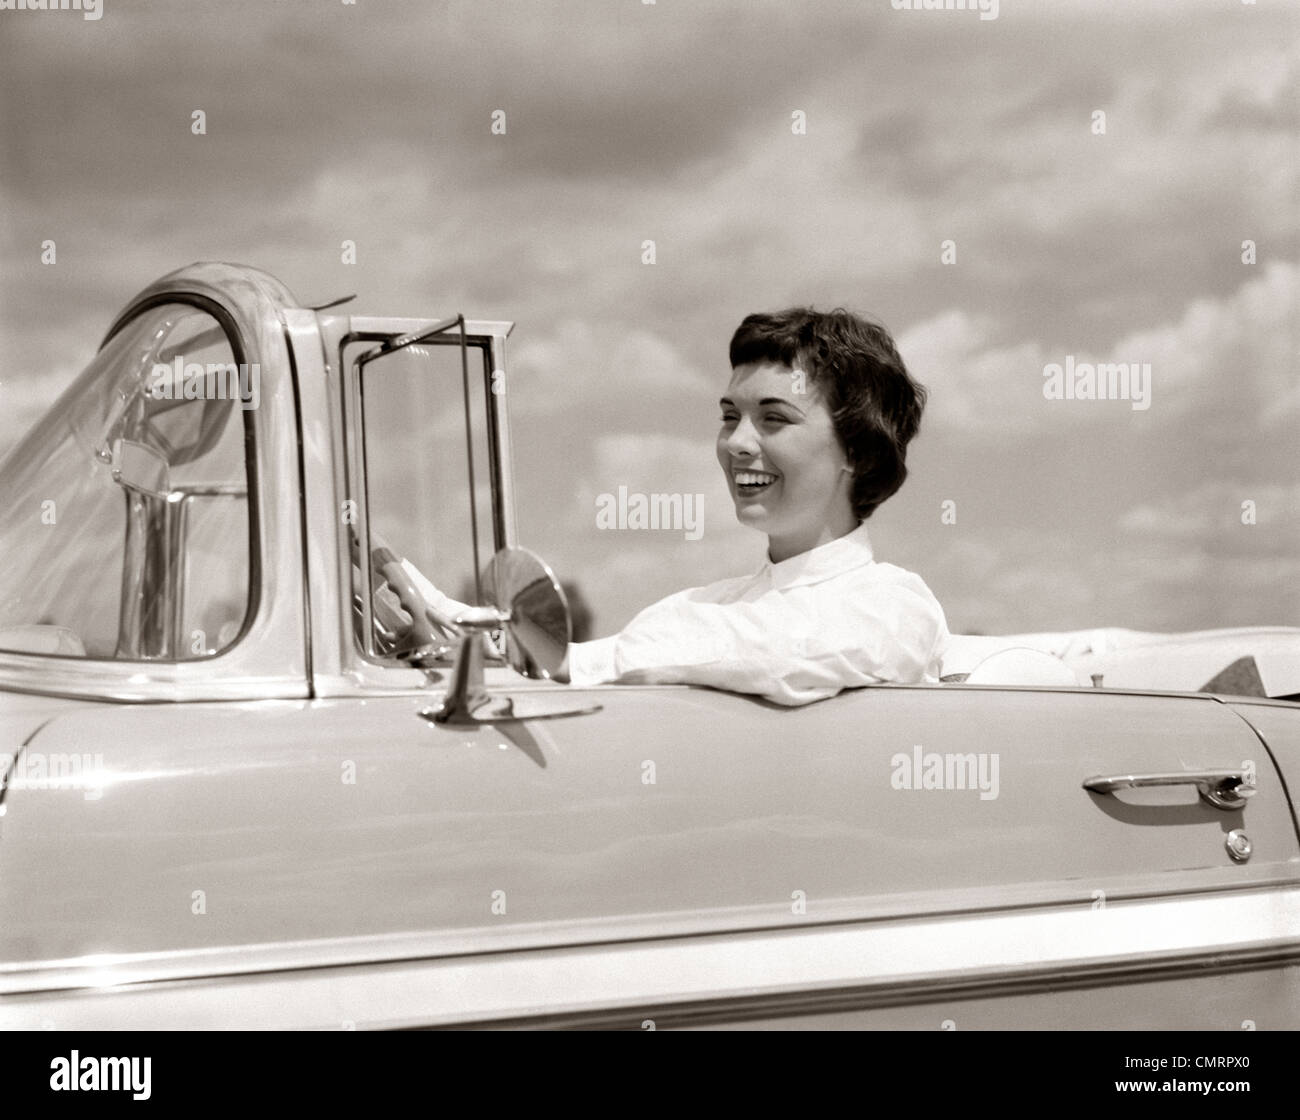 1950s SMILING WOMAN DRIVING CHEVROLET CONVERTIBLE AUTOMOBILE Stock Photo